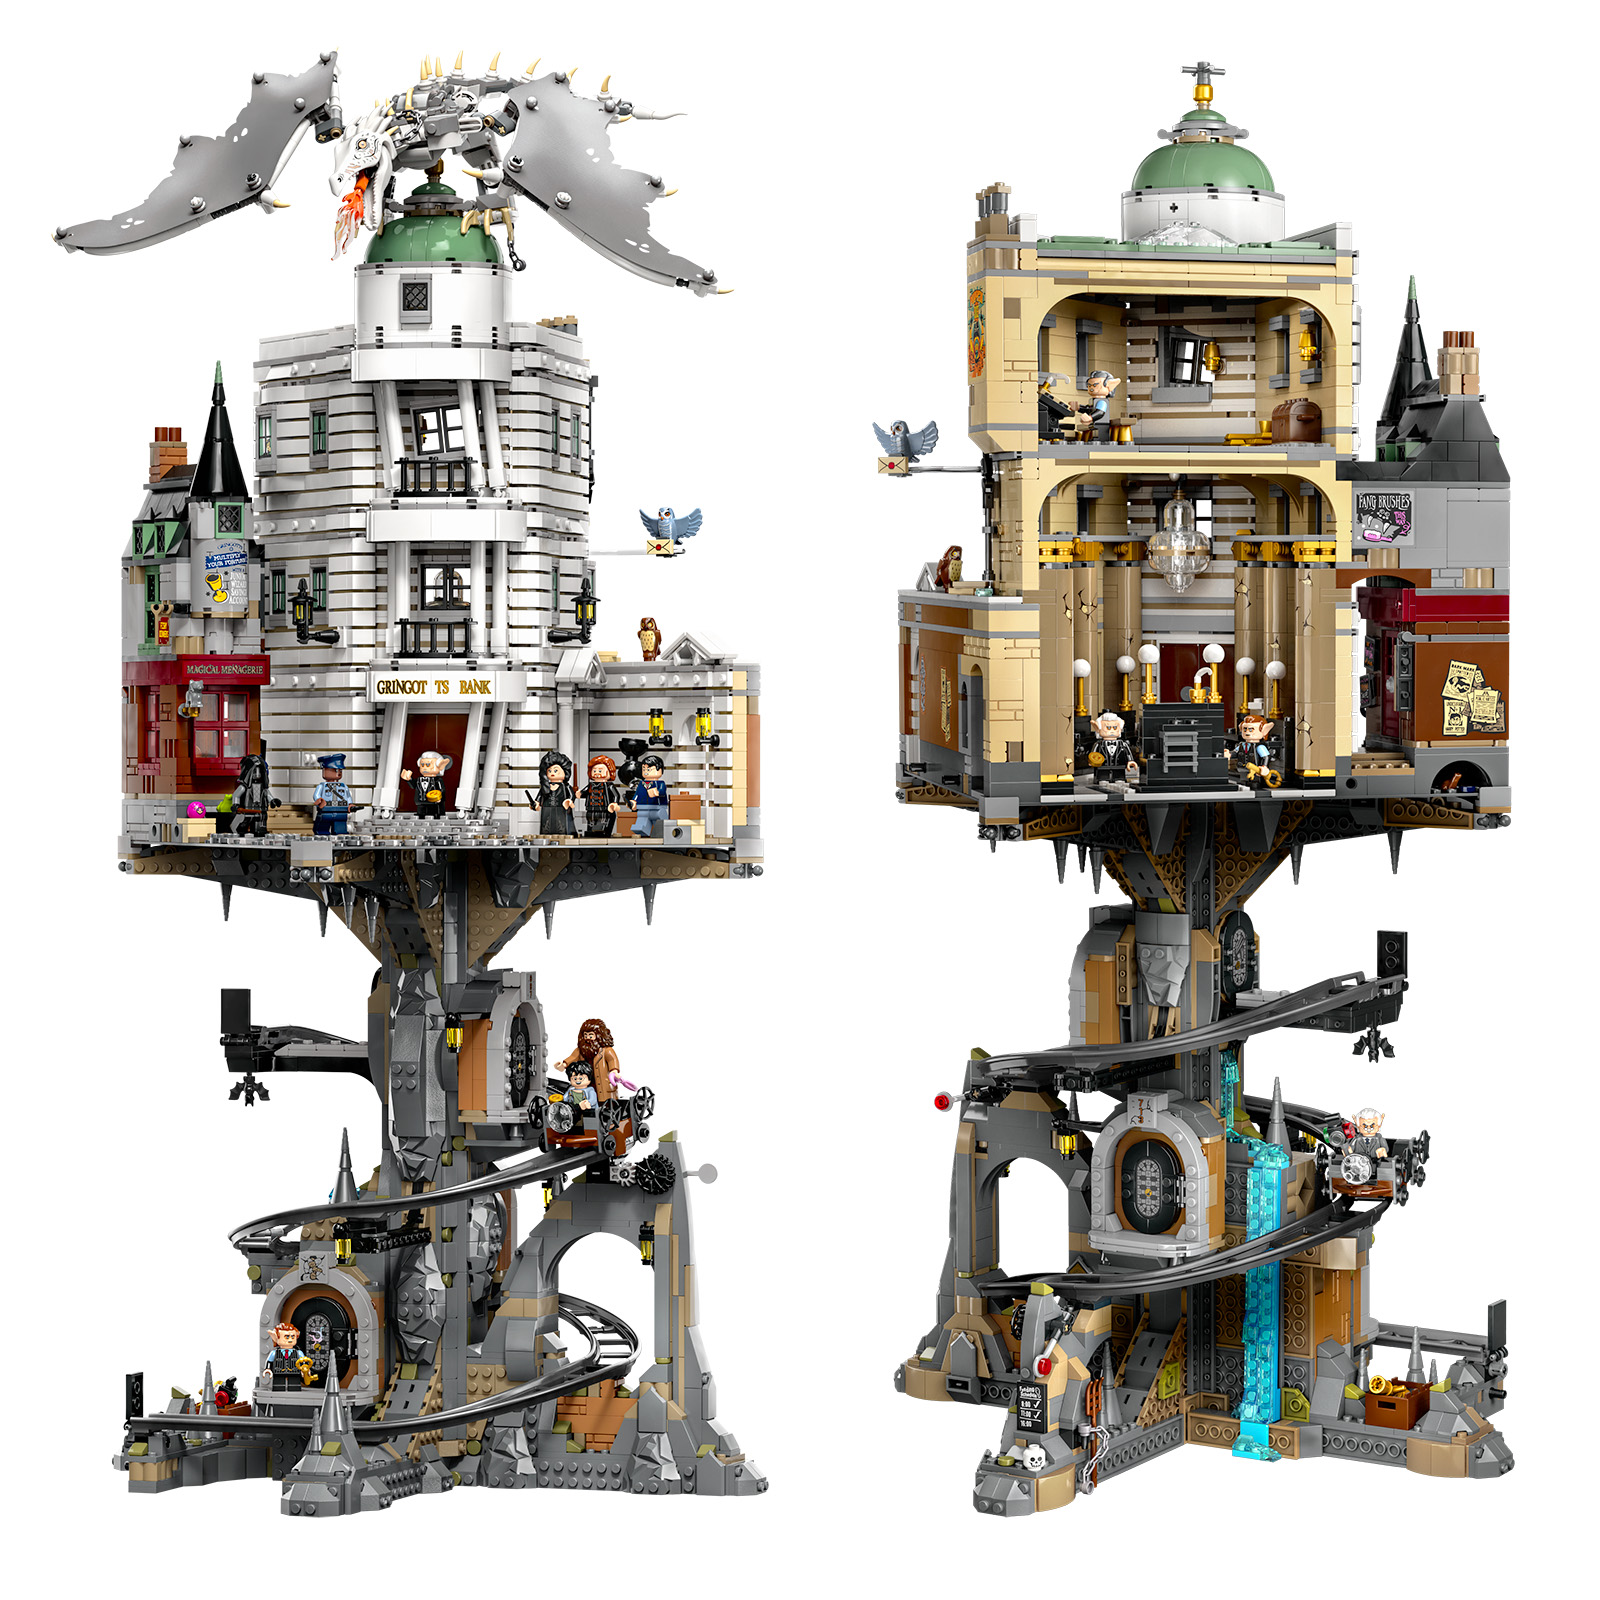 LEGO Harry Potter Gringotts Wizarding Bank Collectors' Edition (76417)  Officially Announced - The Brick Fan